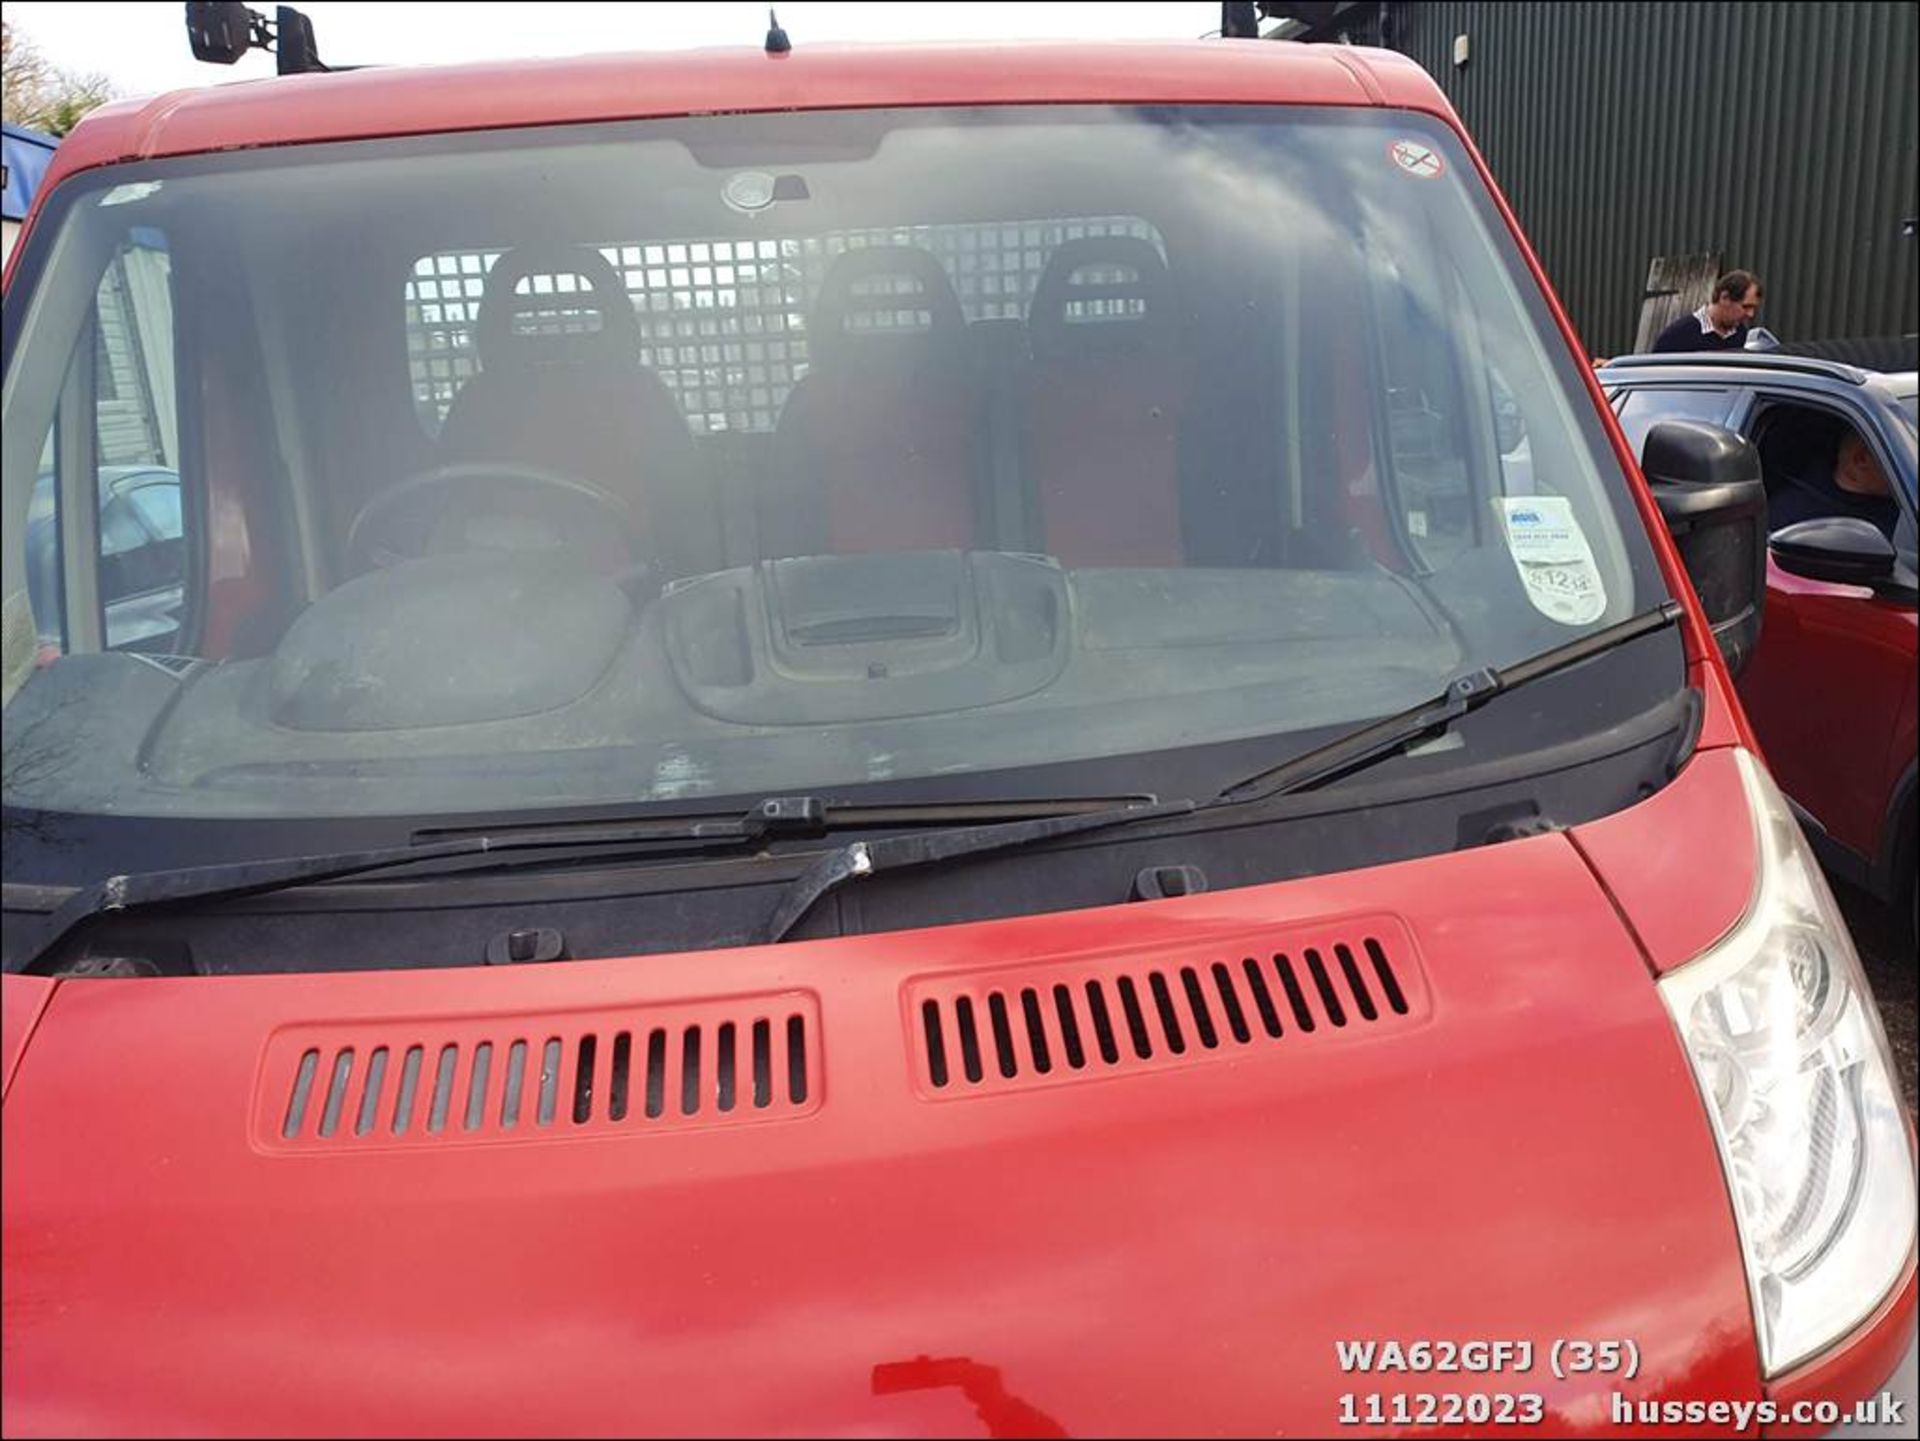 12/62 FIAT DUCATO 35 MULTIJET - 2287cc 2.dr Flat Bed (Red) - Image 36 of 52